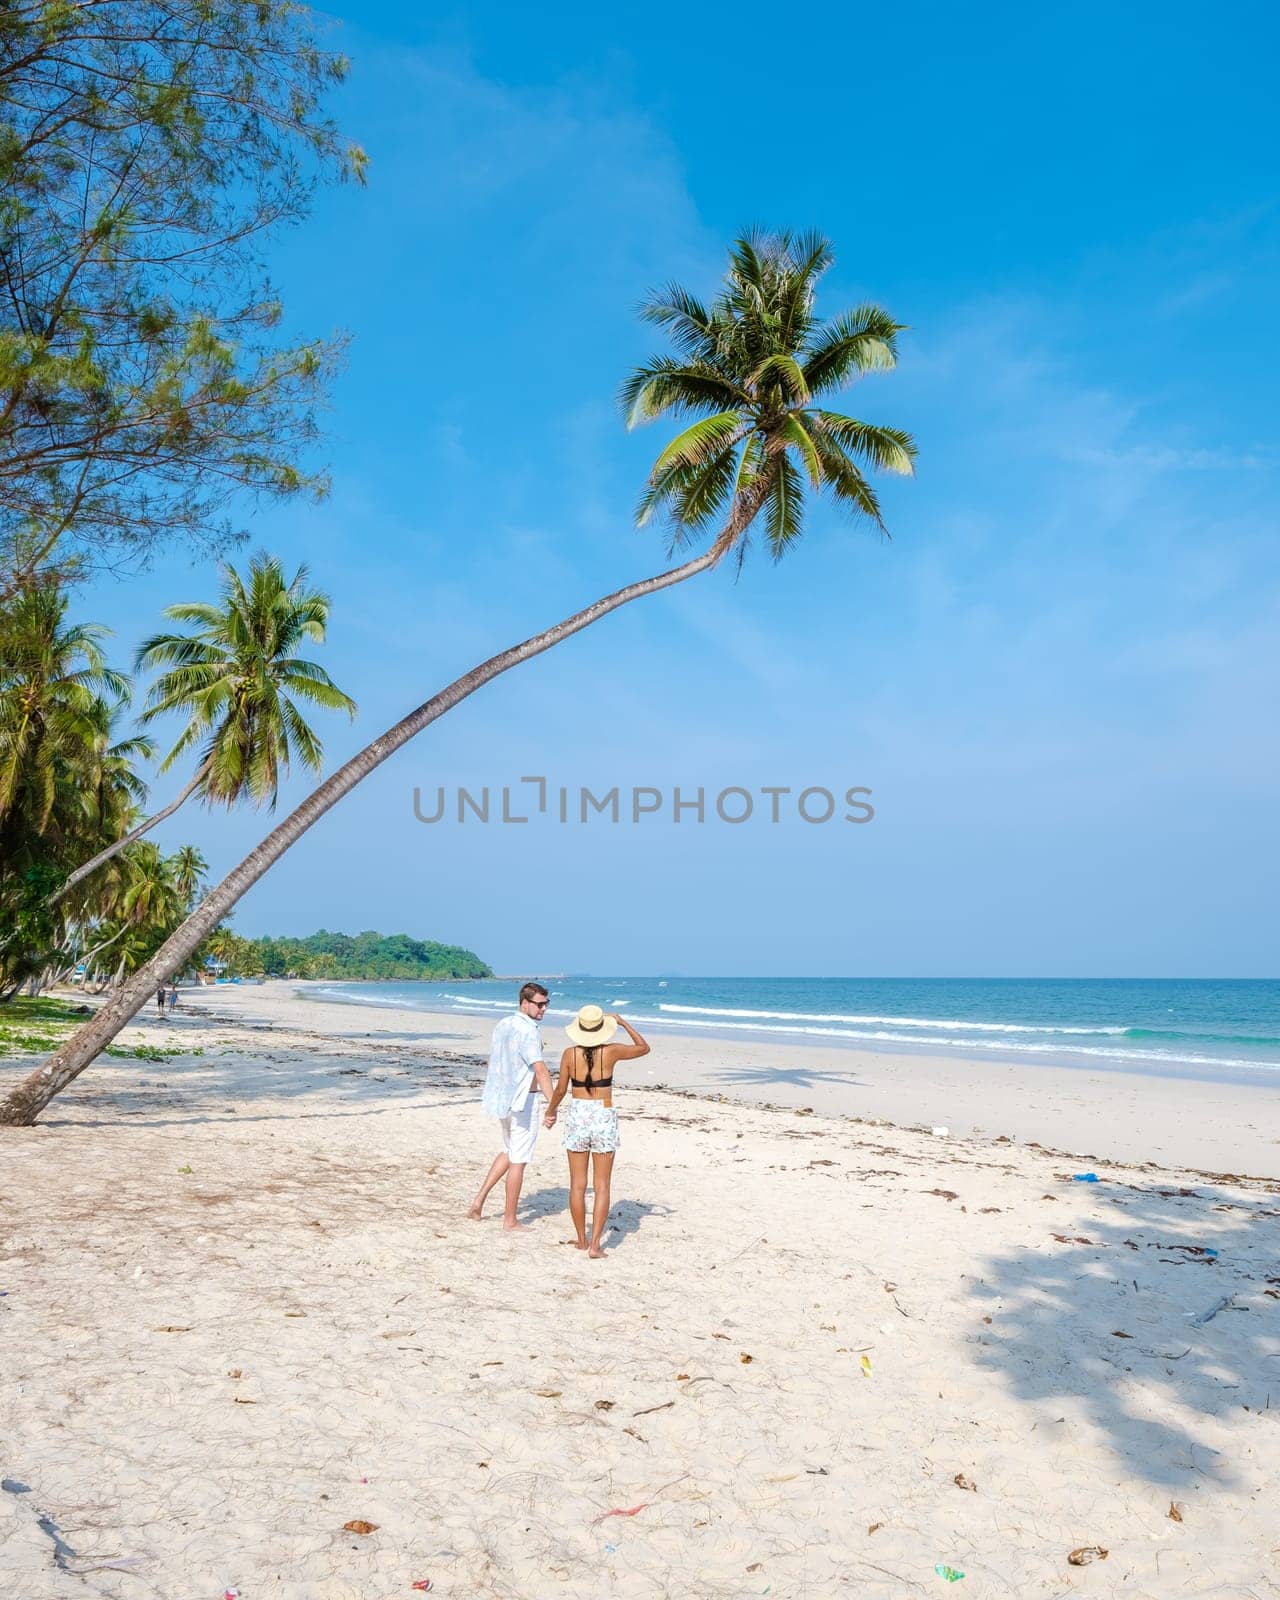 couple on vacation in Thailand, Chumphon province, white tropical beach with palm trees, Wua Laen beach Chumphon area Thailand, palm tree hanging over the beach with a couple on vacation in Thailand.